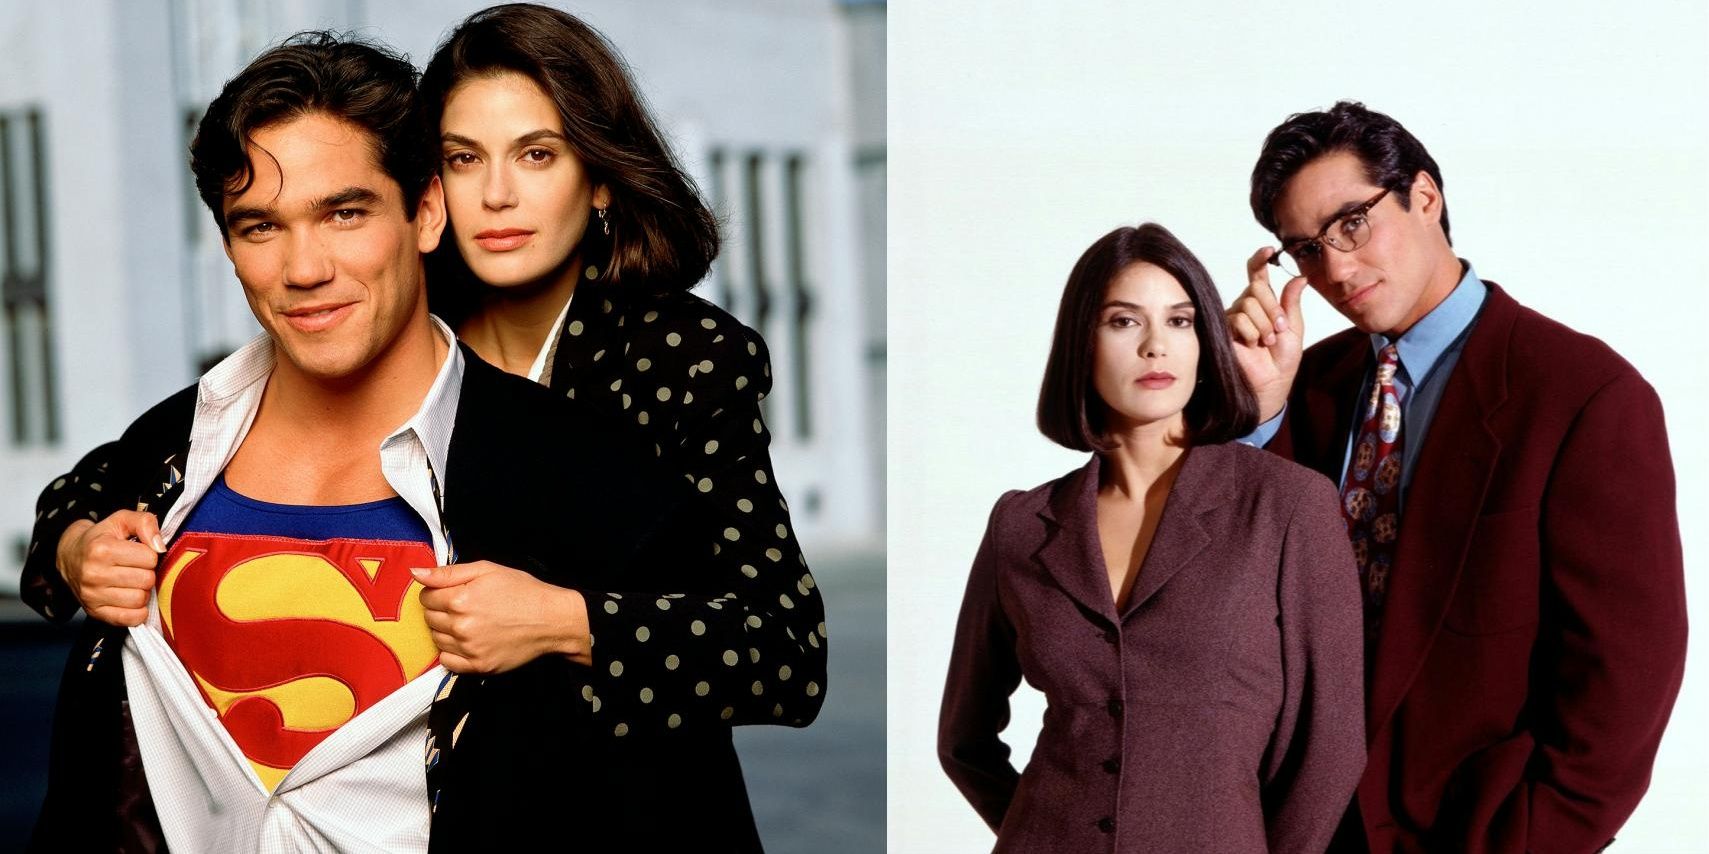 Lois & Clark split image – Promotional photos of Dean Cain and Teri Hatcher looking at the camera